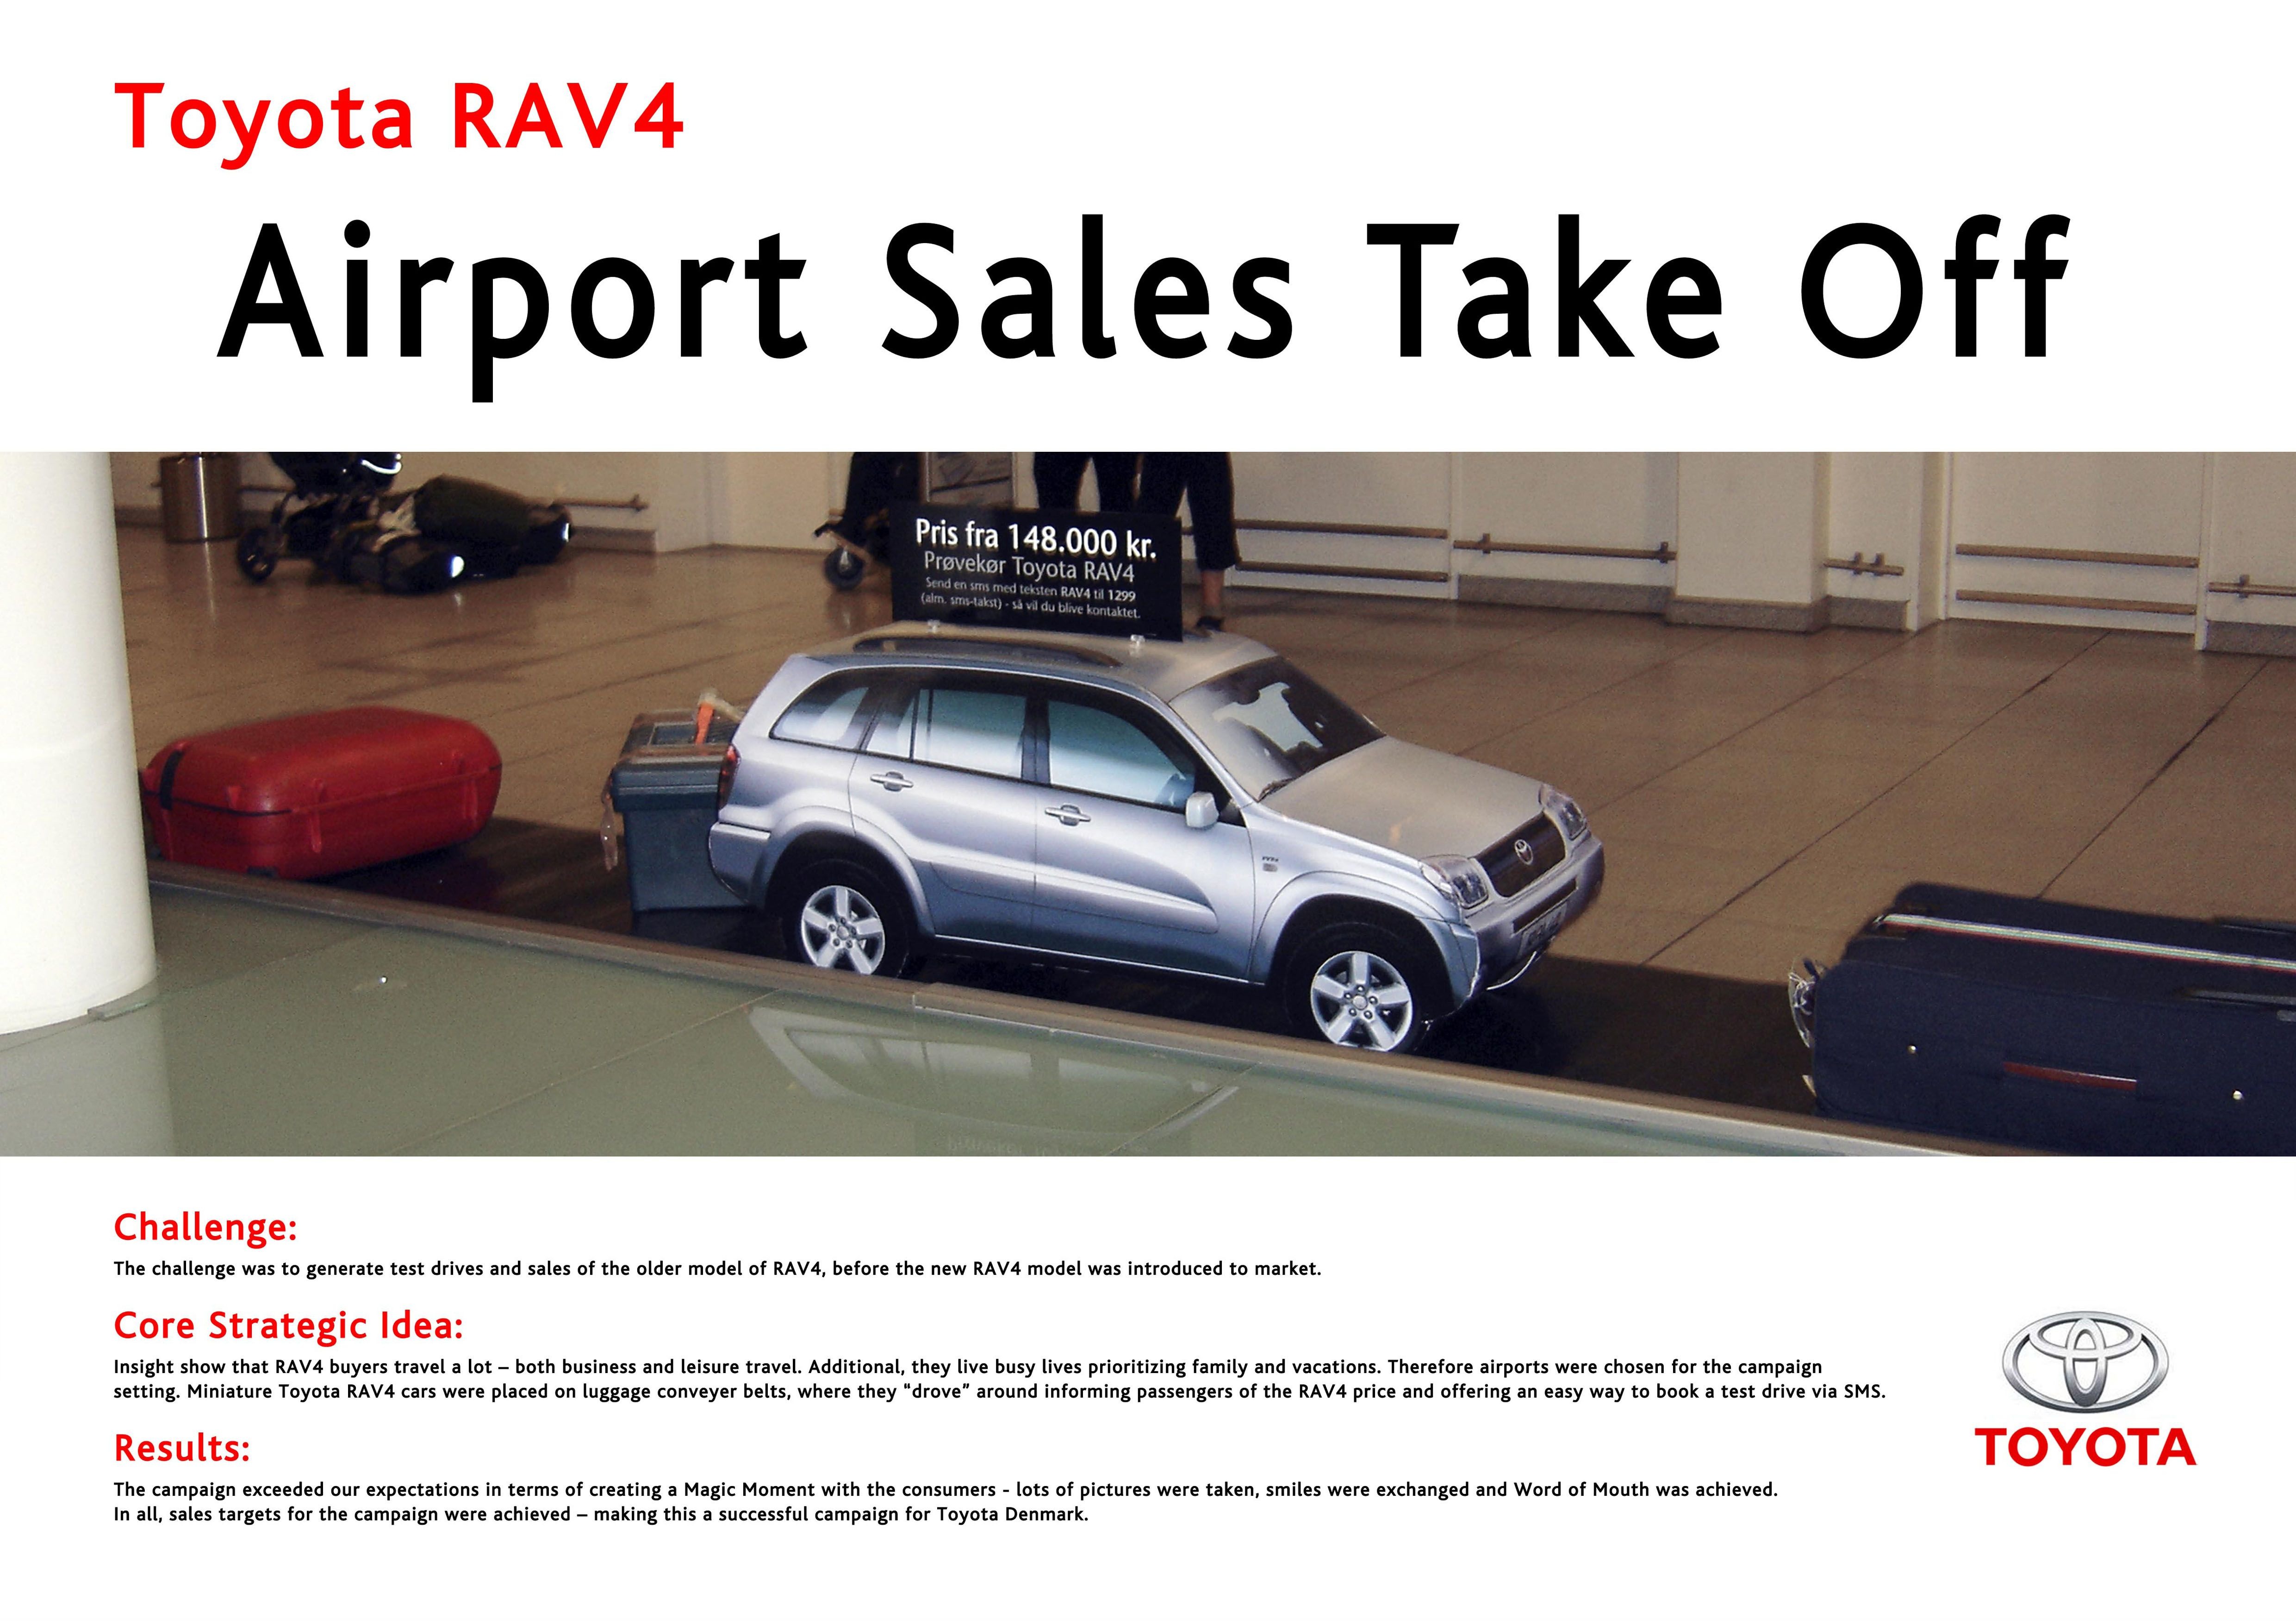 AIRPORT SALES TAKE OFF